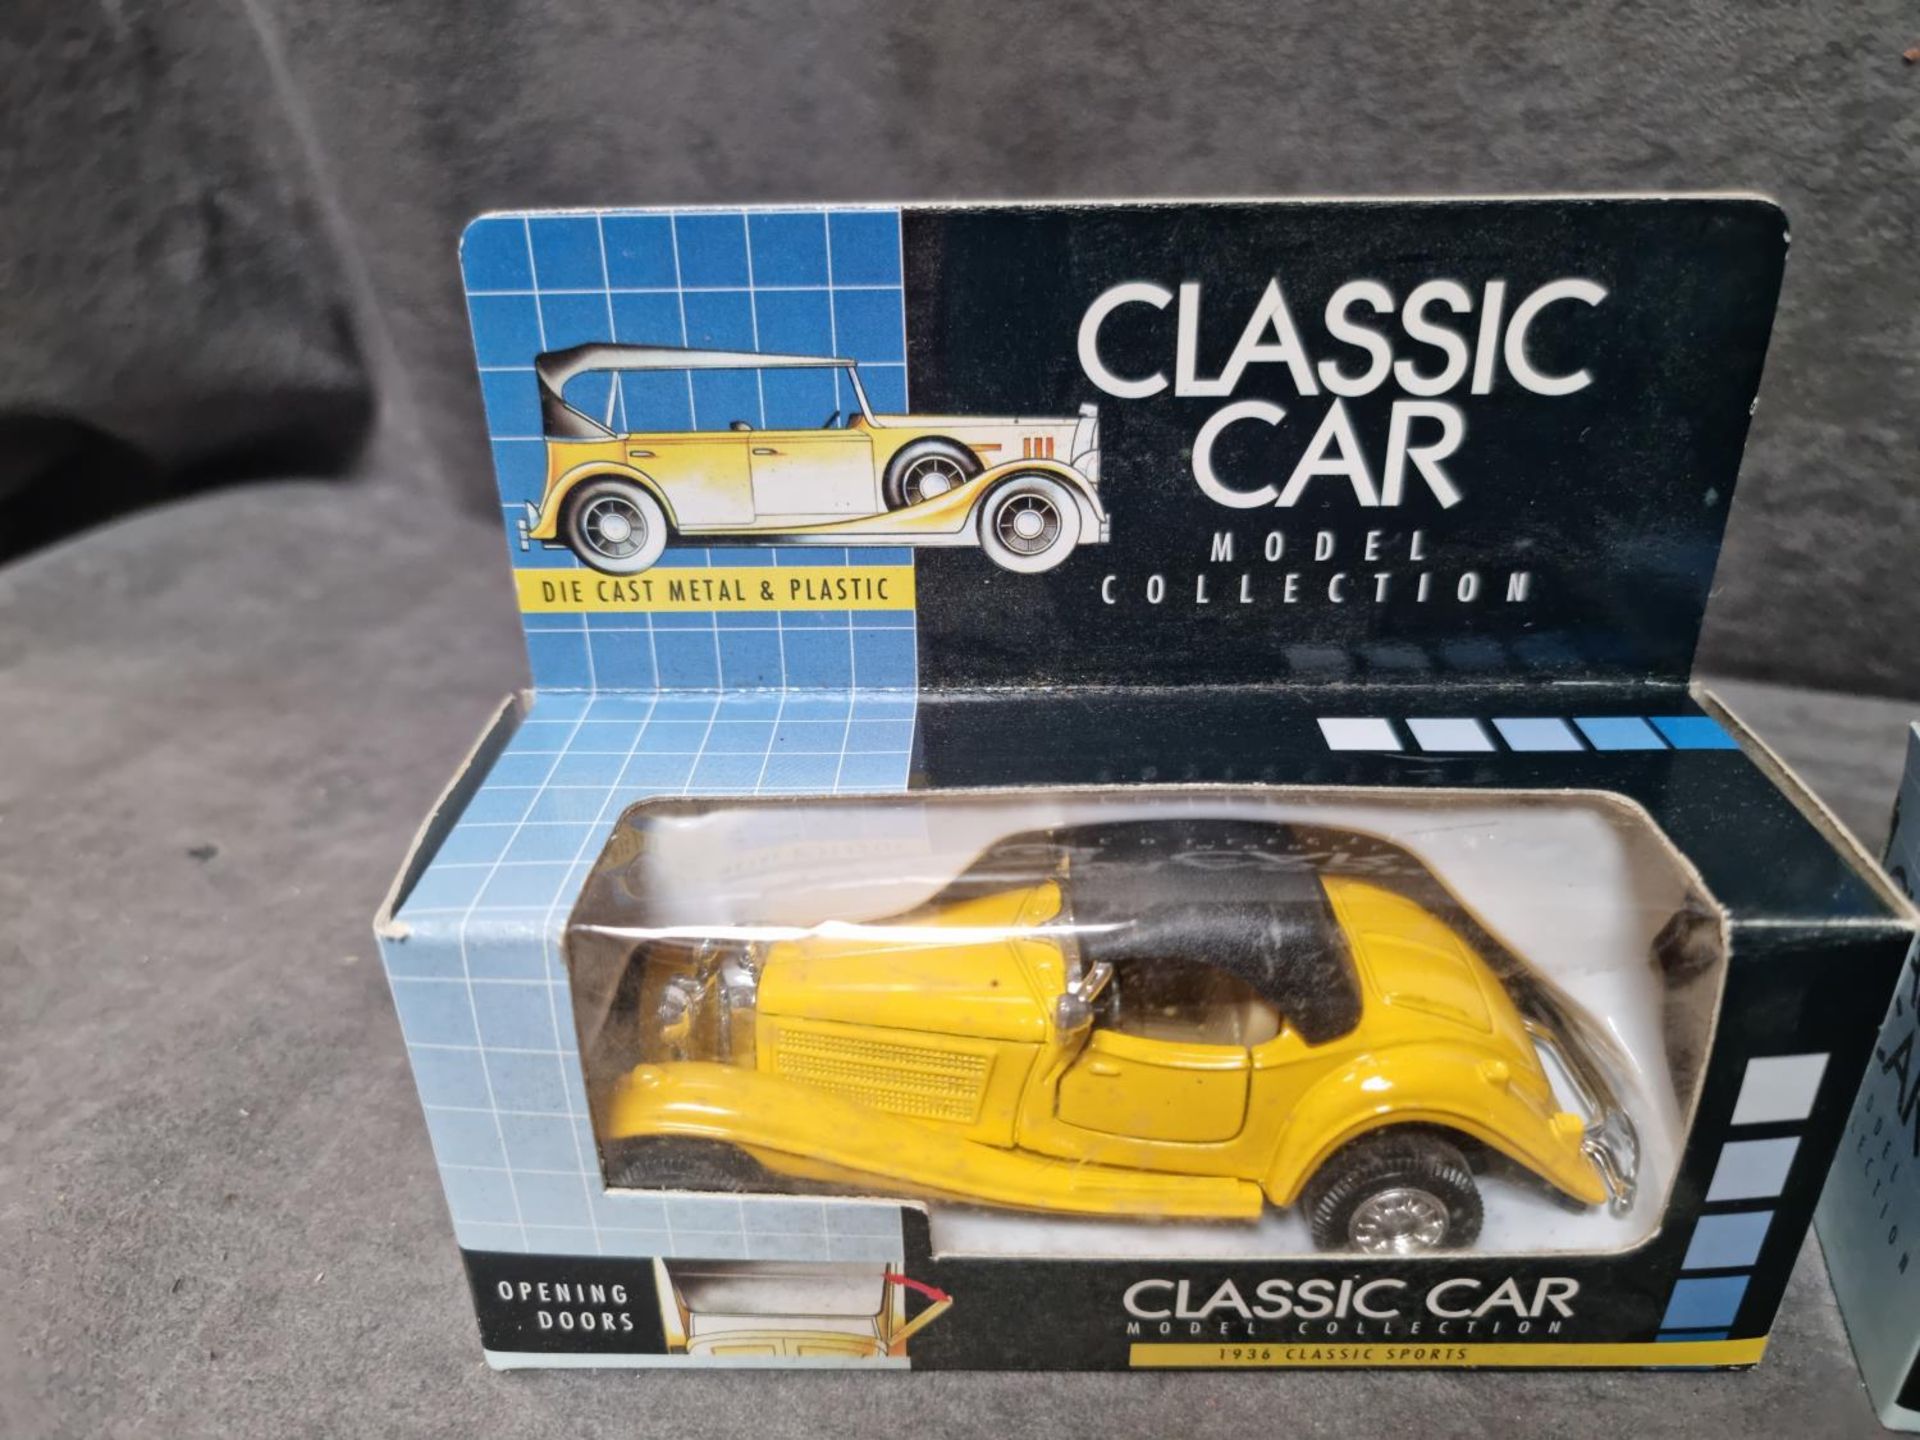 2 x Classic Car Model Collection Diecast Models #8871h 1936 Classic Sports And #8875C 1930 Classic - Image 2 of 3